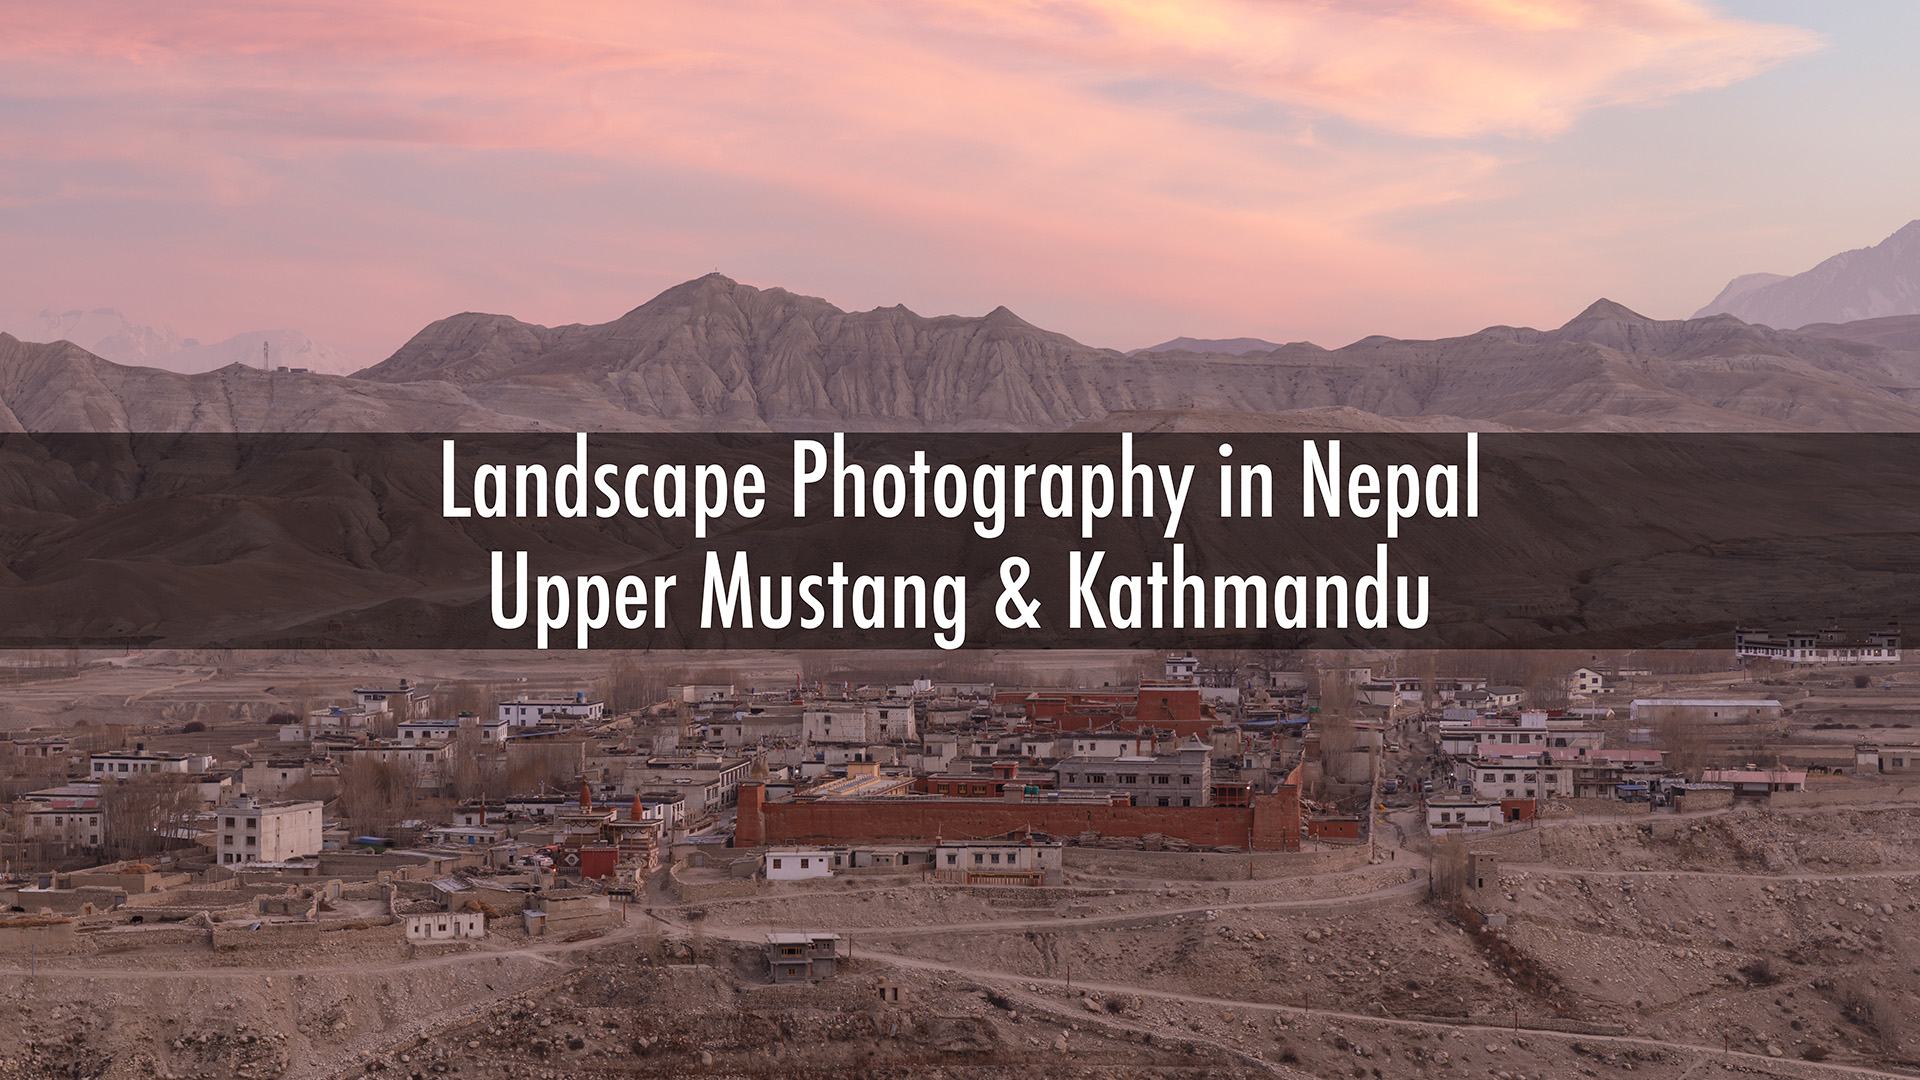 Landscape photography in Nepal. Upper Mustang and Kathmandu.